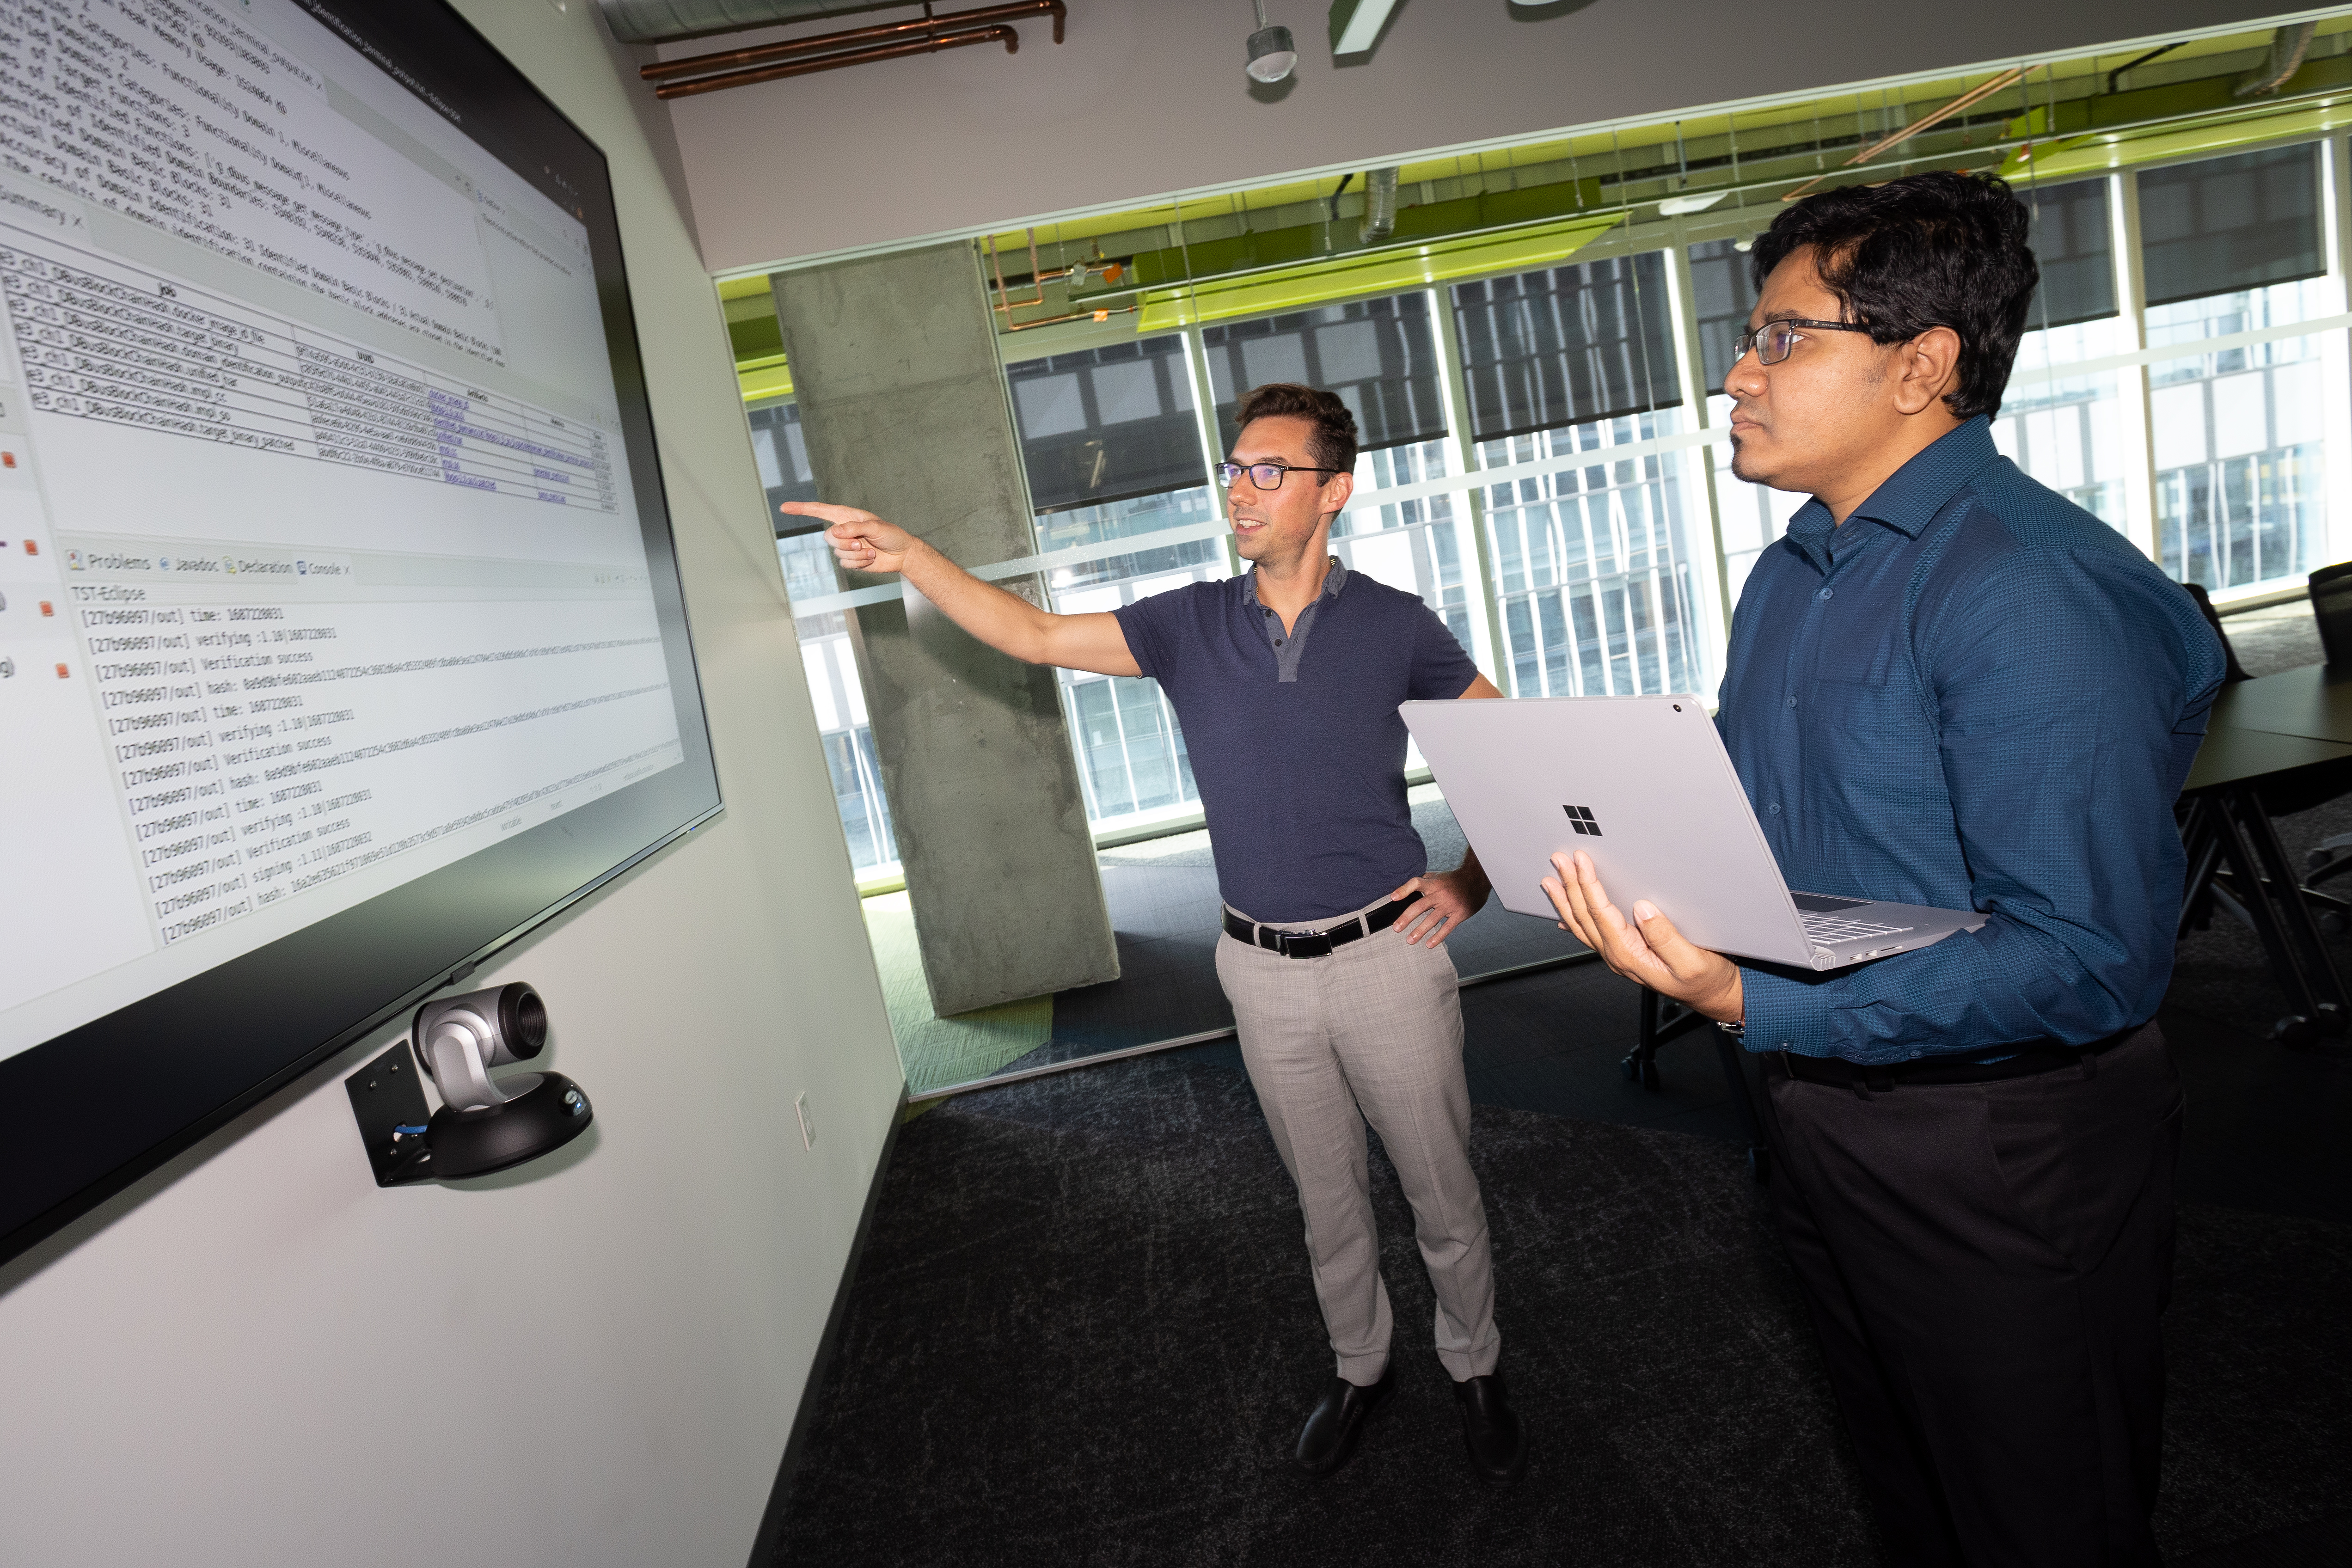 Brendan Saltaformaggio, left, and Amit Sikder are working on a $10 million DARPA project to unpack legacy software systems, incorporate updates, and redeploy them in weeks or months rather than years. (Photo: Candler Hobbs)
